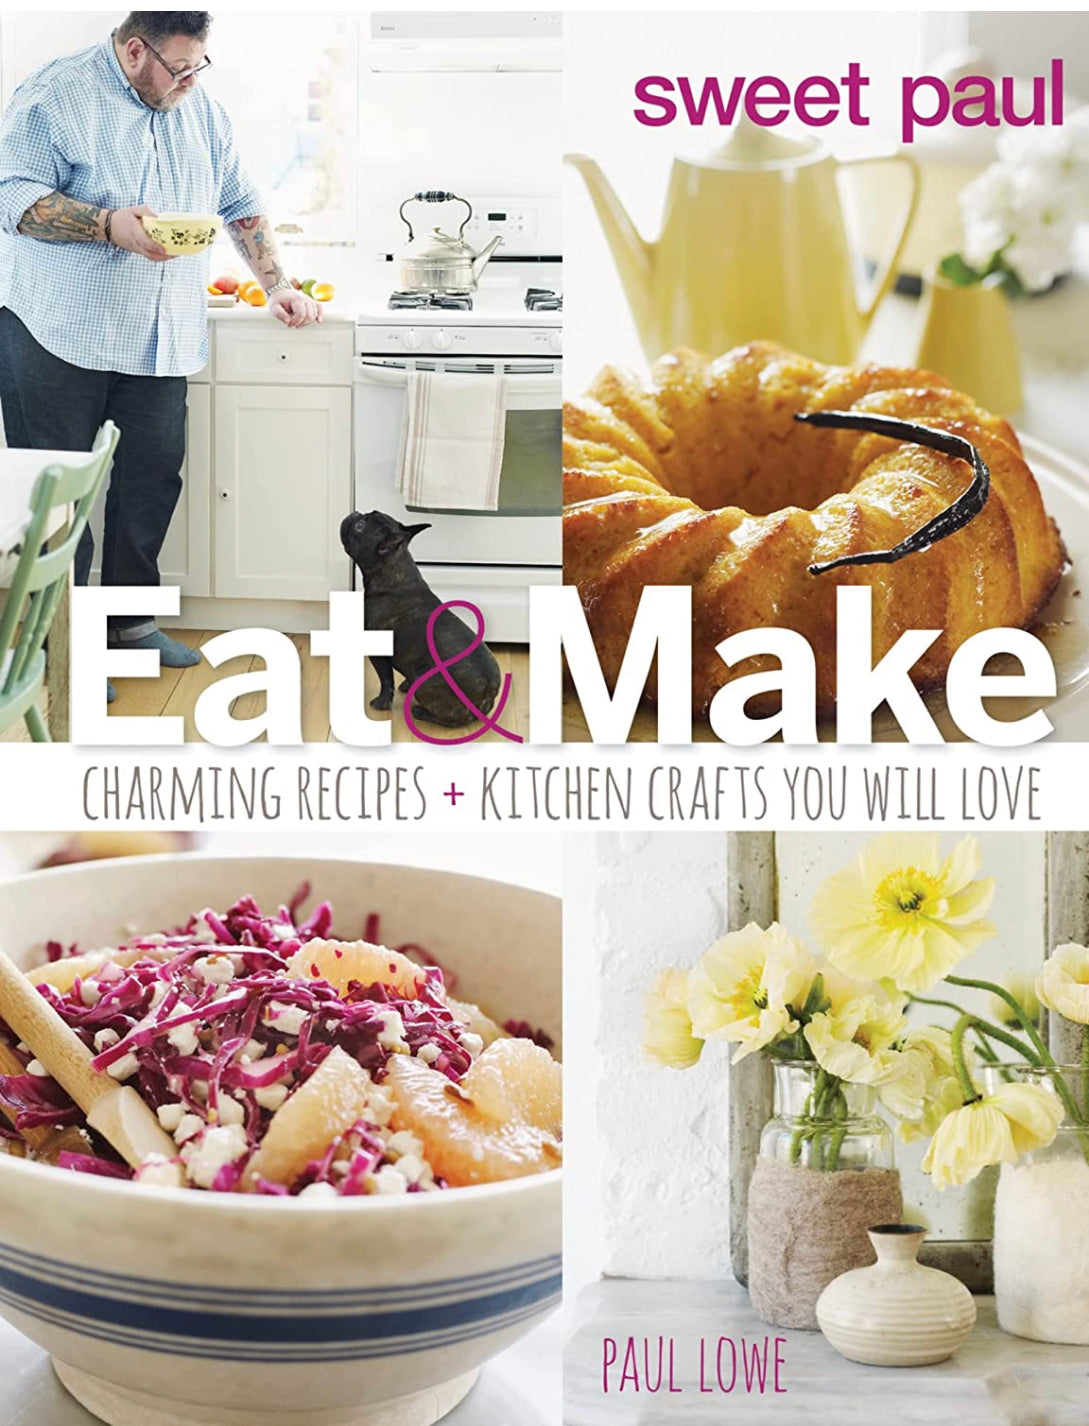 Eat & Make charming recipes+ Kitchen crafts you will love